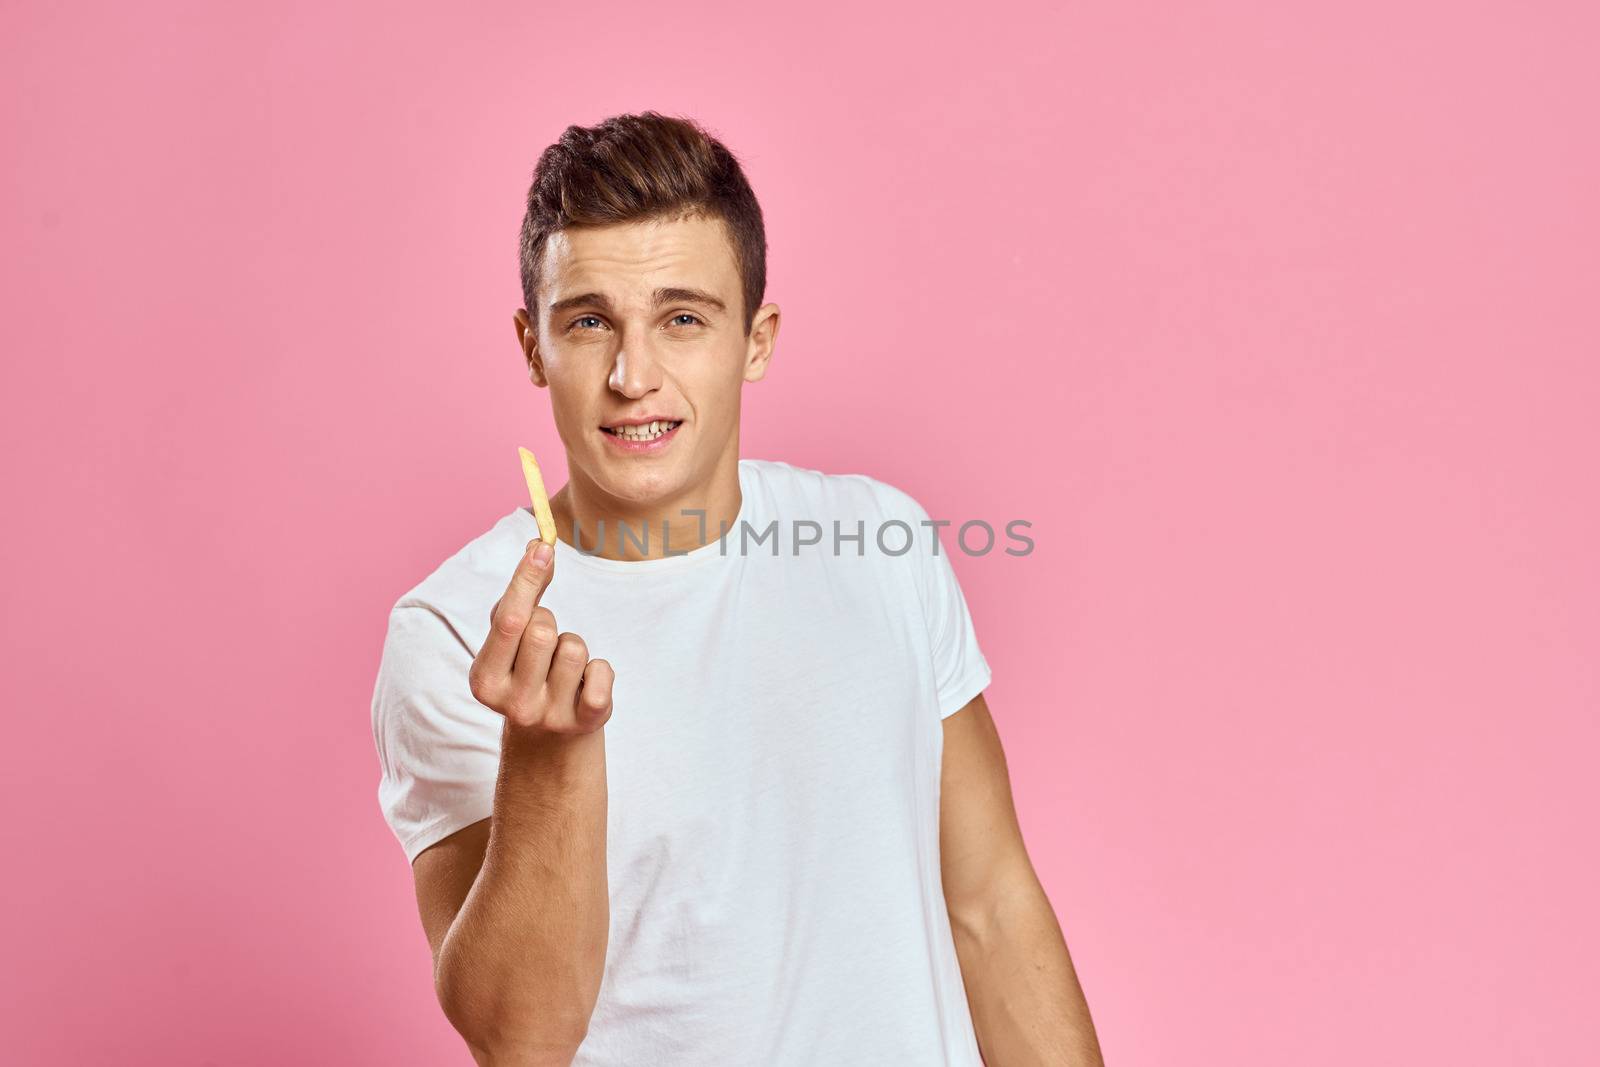 Cute man with fries in hands emotions model fast food pink background cropped view close-up. High quality photo